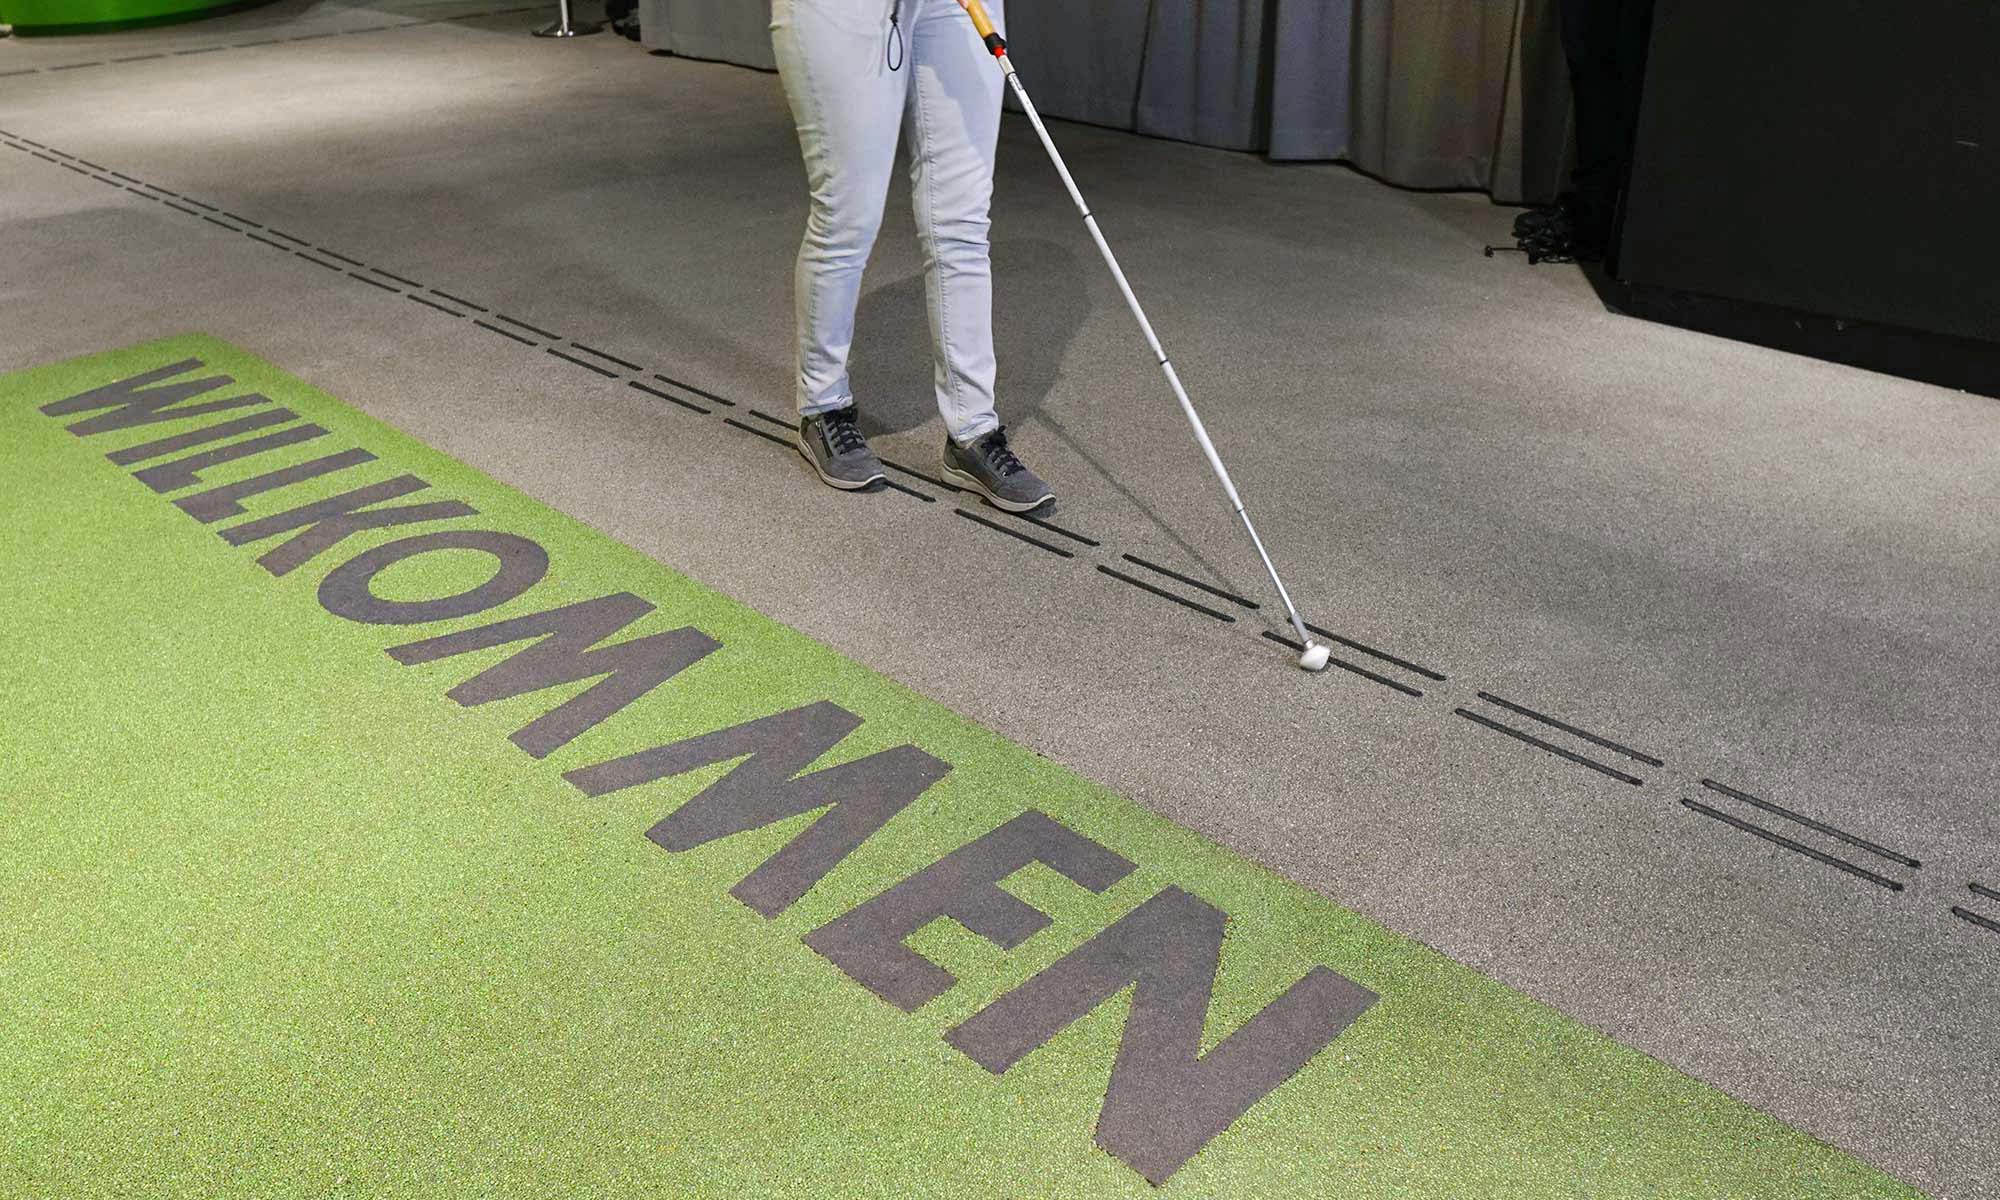 On the picture you can see floor indicators in the entrance area of the museum. A straight path is shown with two adjacent dashed black lines. These go right across the picture. There is a visitor walking along the markings with her cane. In the foreground, there is a large green area on the floor that reads: Welcome.